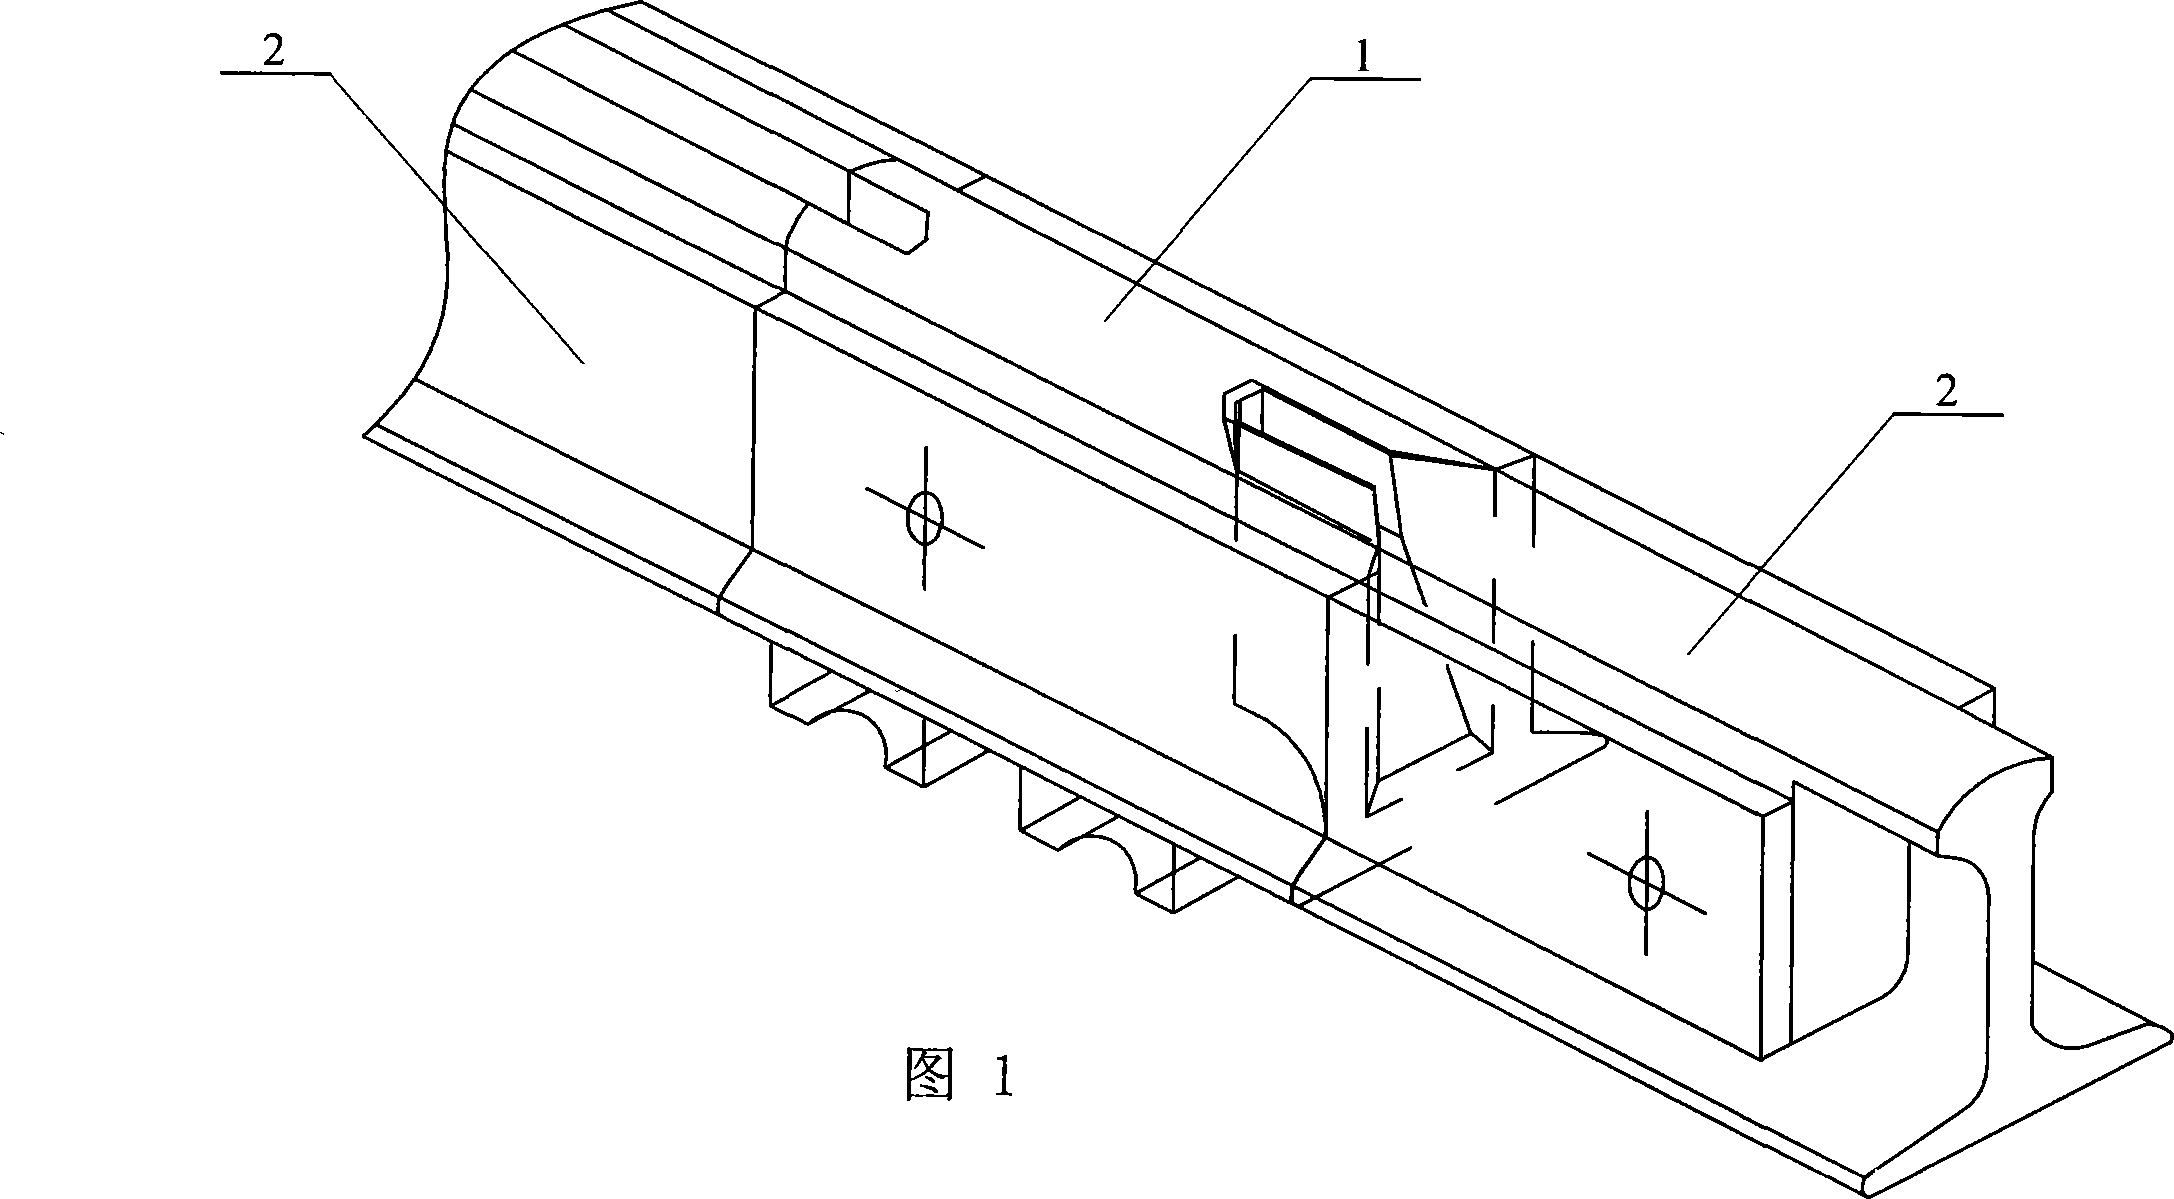 Inserting type fishplate-free rail joint connector